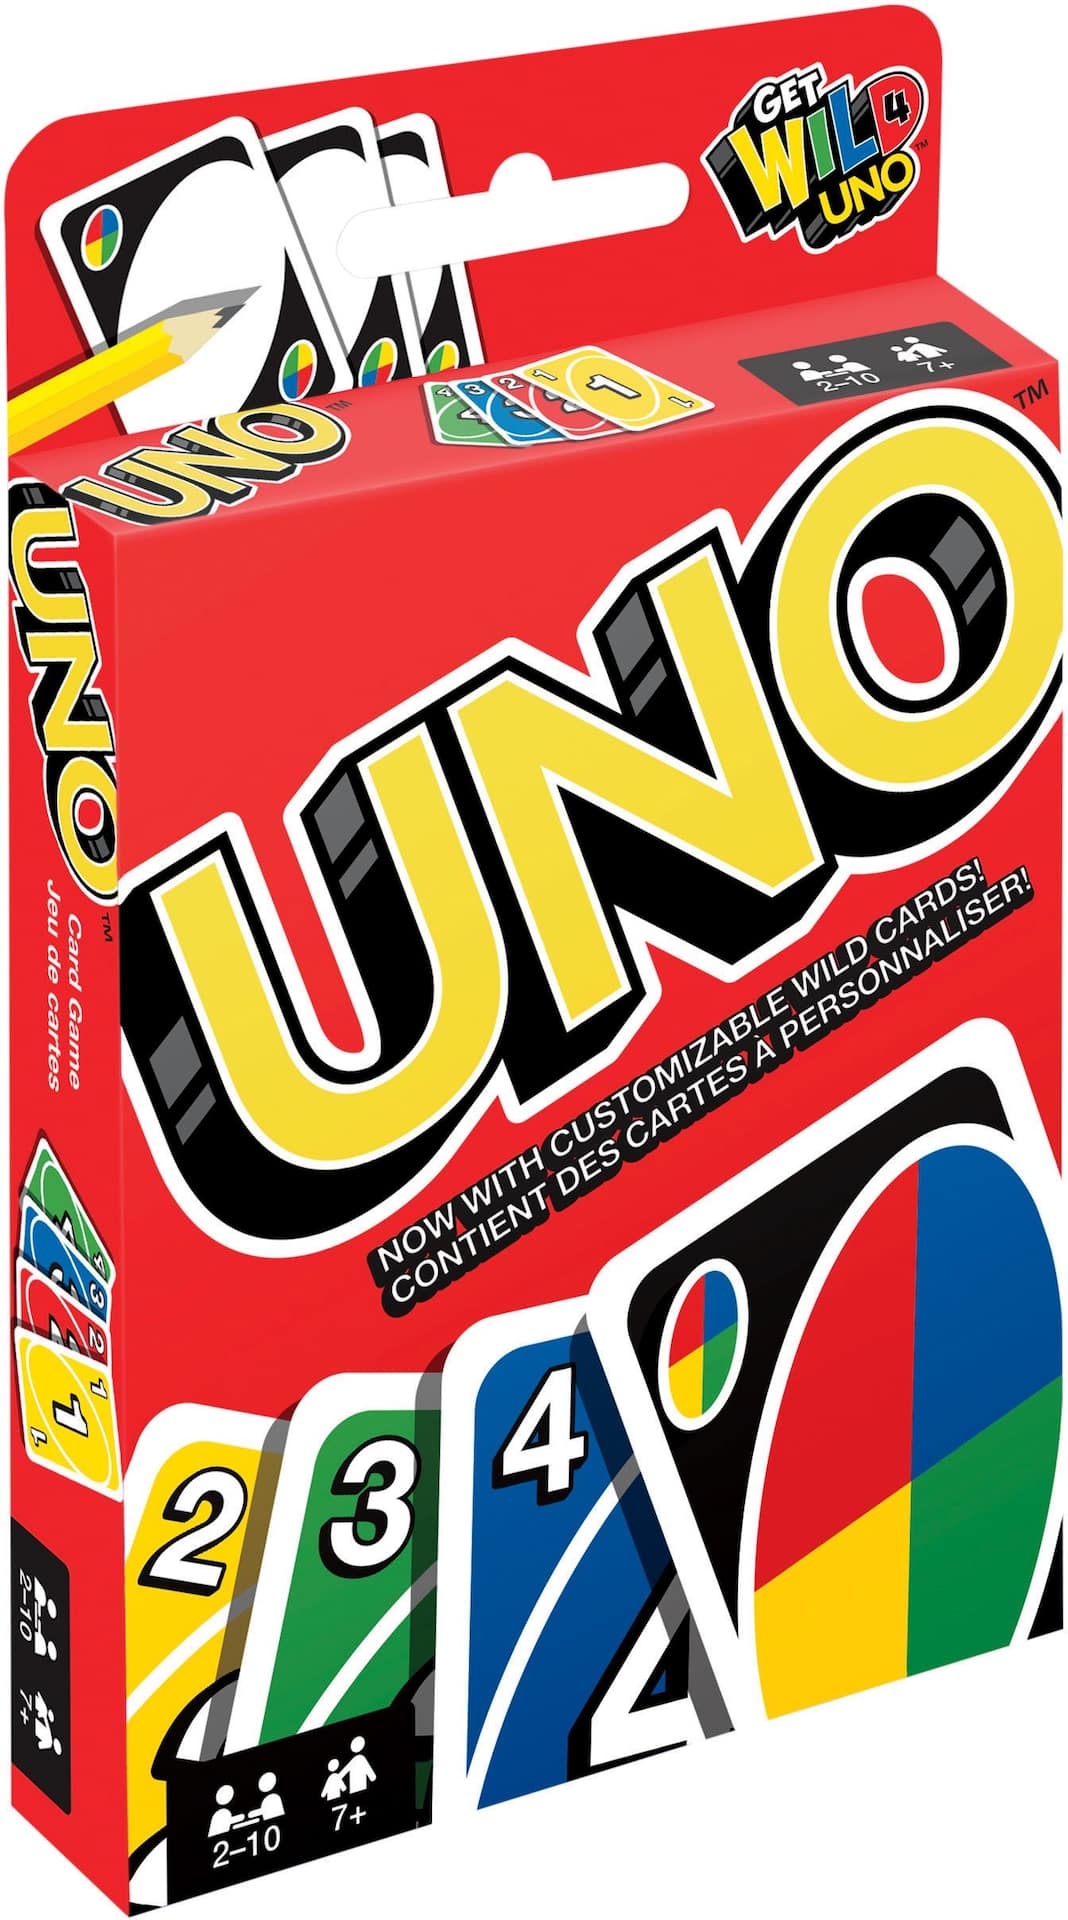 UNO FAQ - All Uno questions and answers you'll ever need!